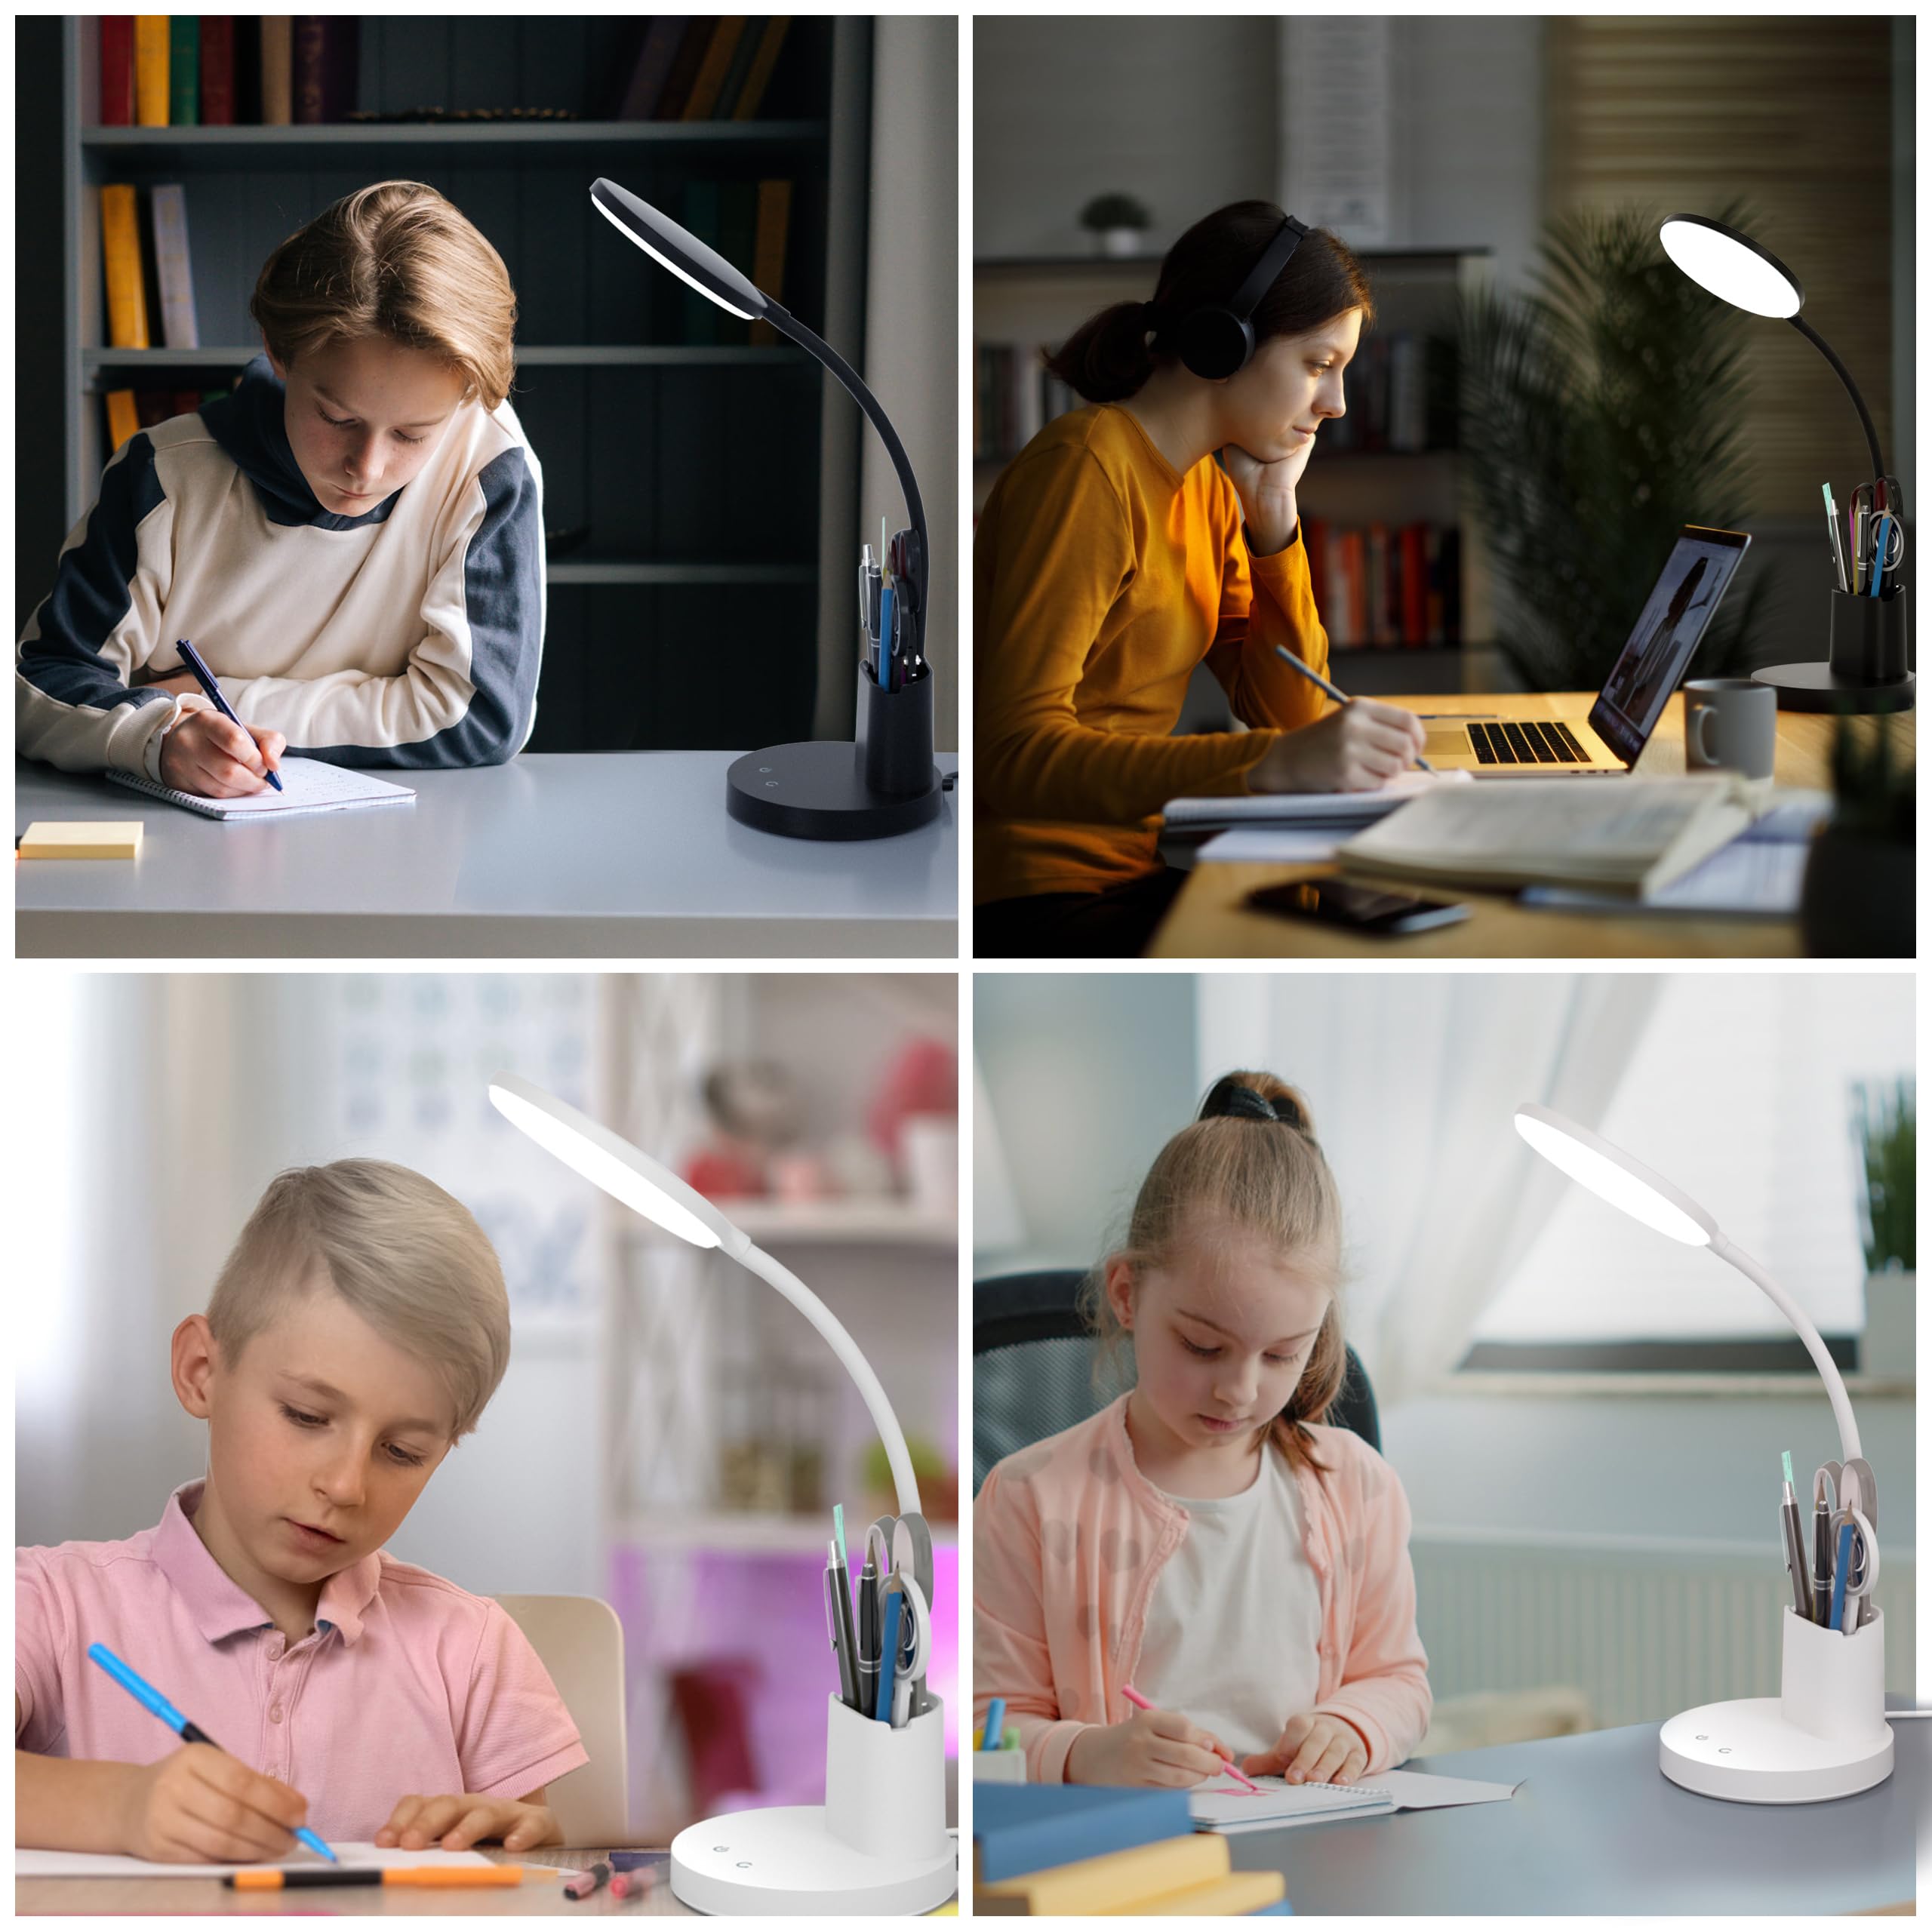 Vicsoon Desk Lamp, LED Desk Lamp for Home Office, Touch Table Lamp with 3 Color Modes 360° Adjustable Arm, Dimmable Desk Light with Pen Phone Holder, Black